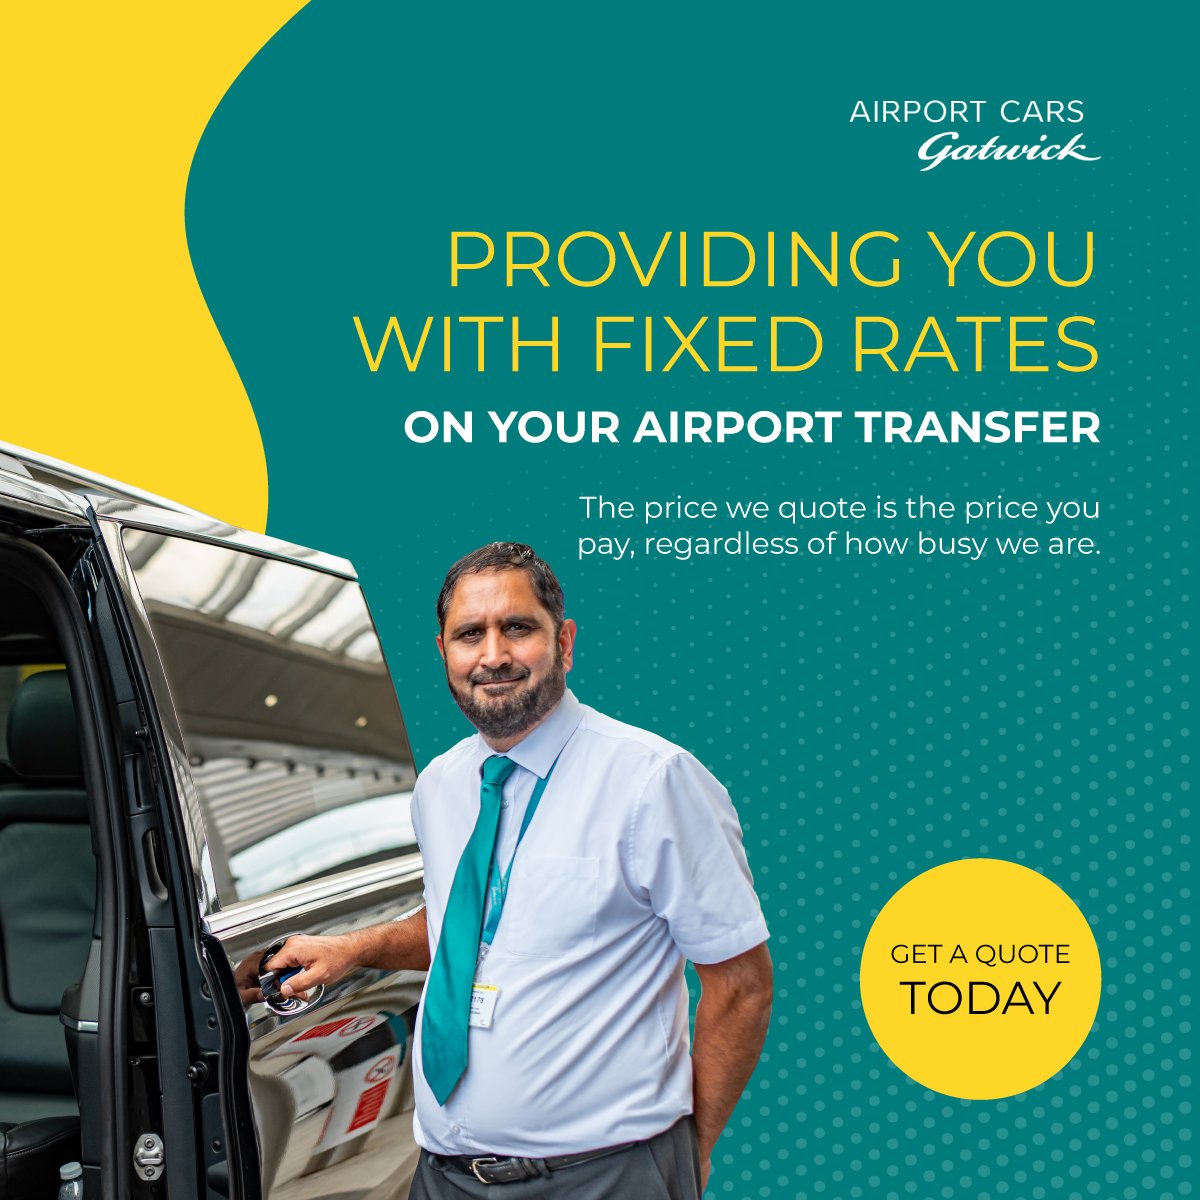 Experience peace of mind with our reliable service! 💼✨ 
Our transparent pricing ensures that the fare you see is the fare you pay, with convenient payment options including cards and cash. 💳
Book now ➡️ airportcars-gatwick.com
#AirportCarsGatwick #AirportTransfer #Gatwick